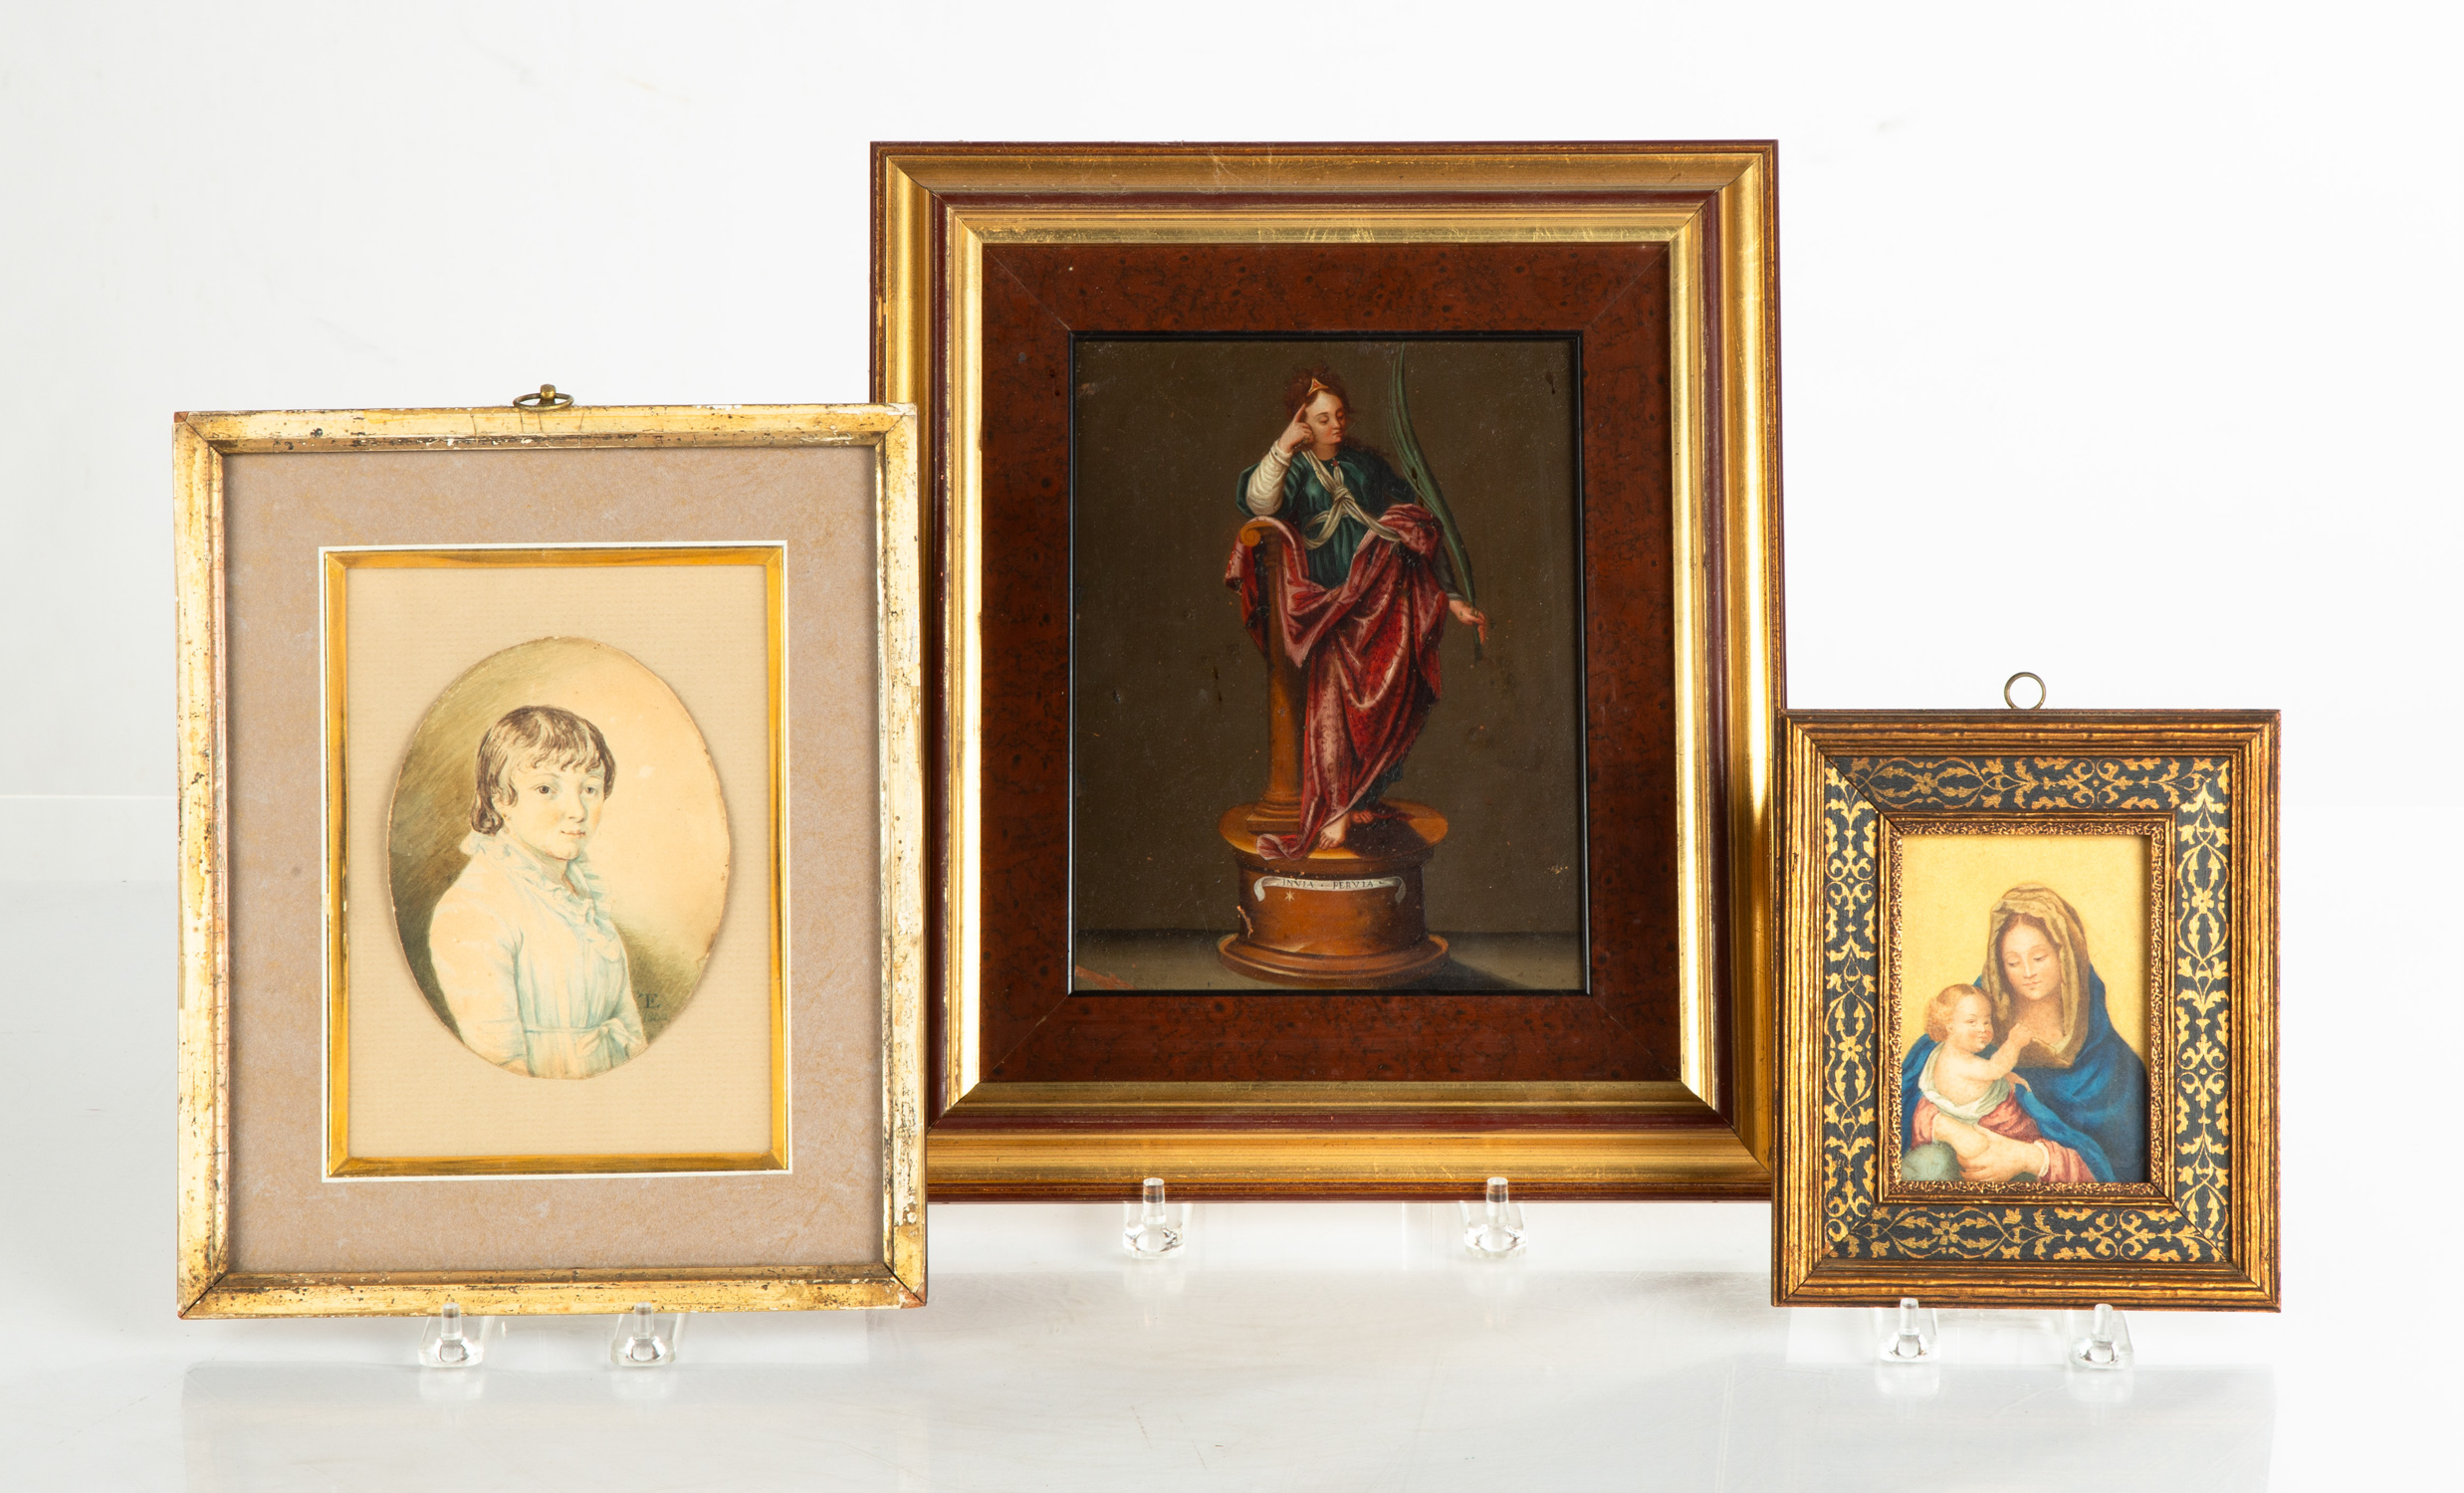 THREE PAINTINGS 19th century. Two watercolor/gouache